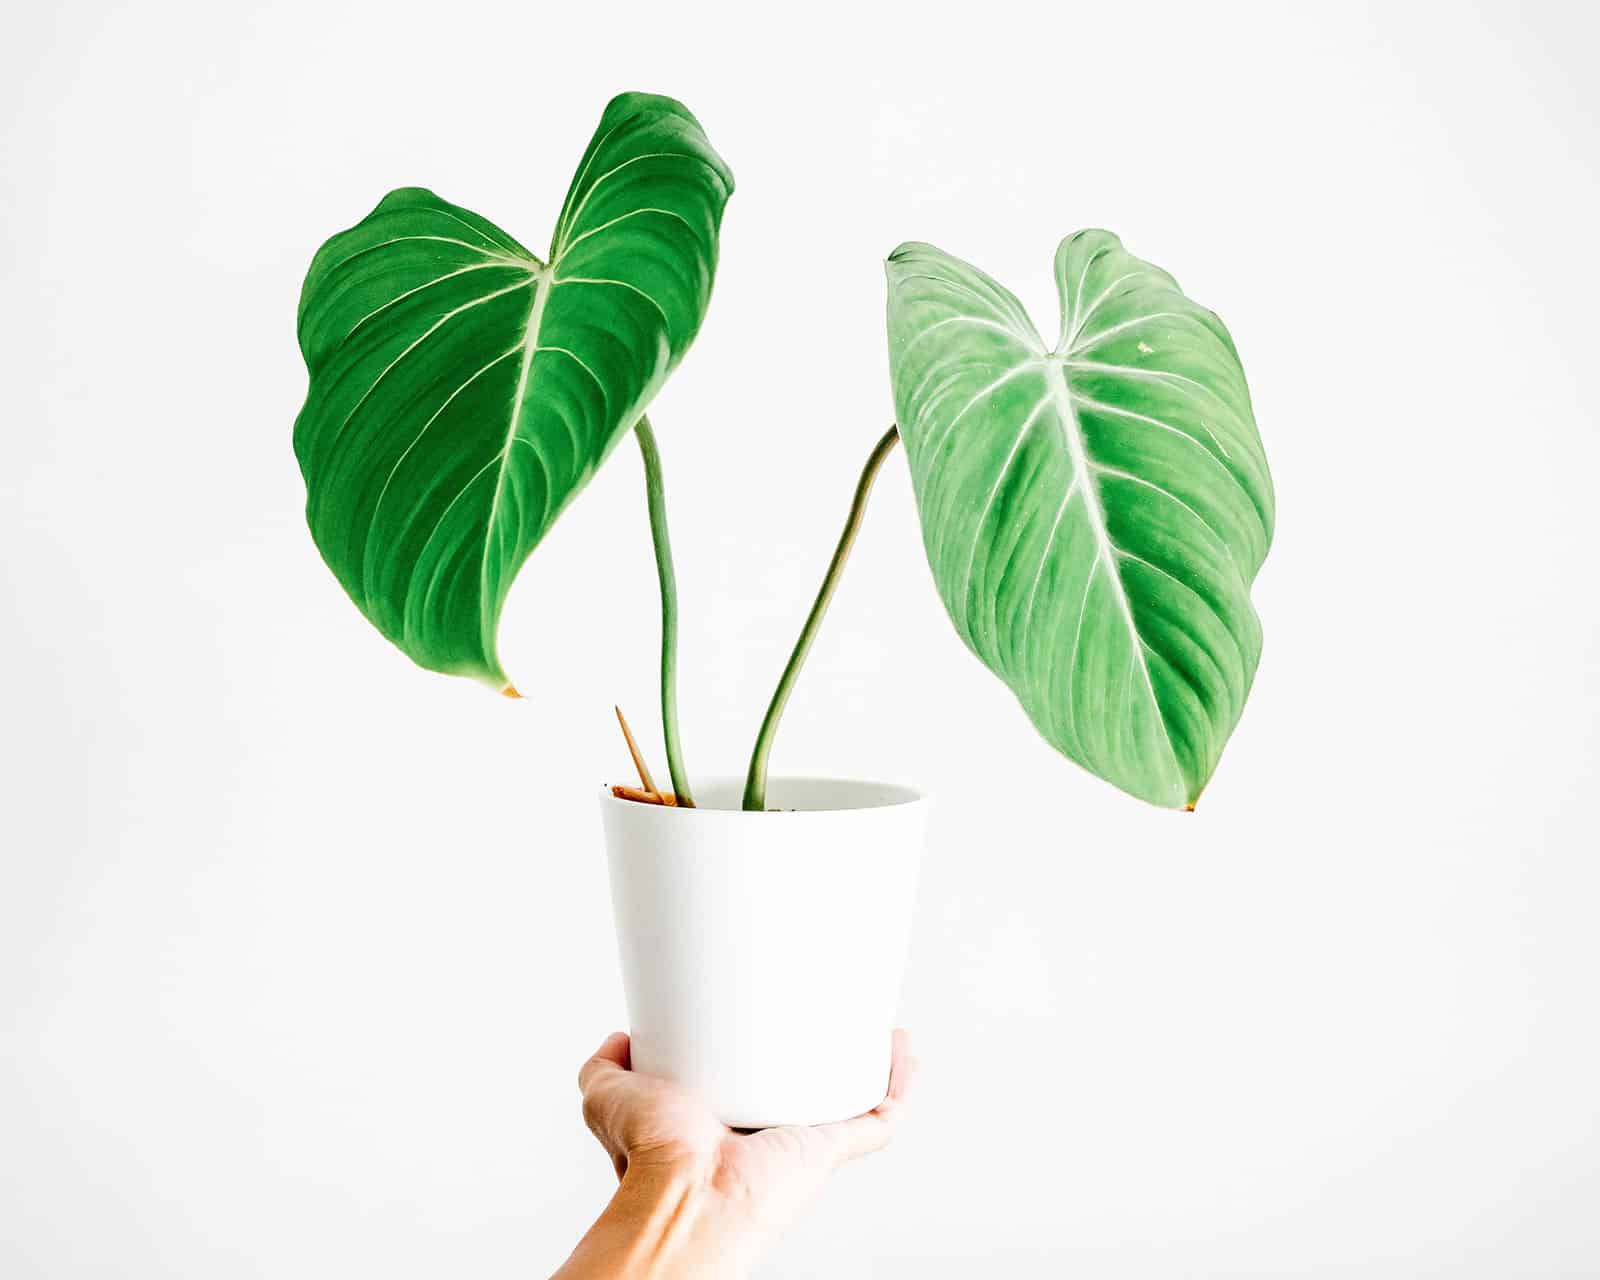 Minimalist shot of a hand holding a Philodendron gloriosum houseplant in a white pot